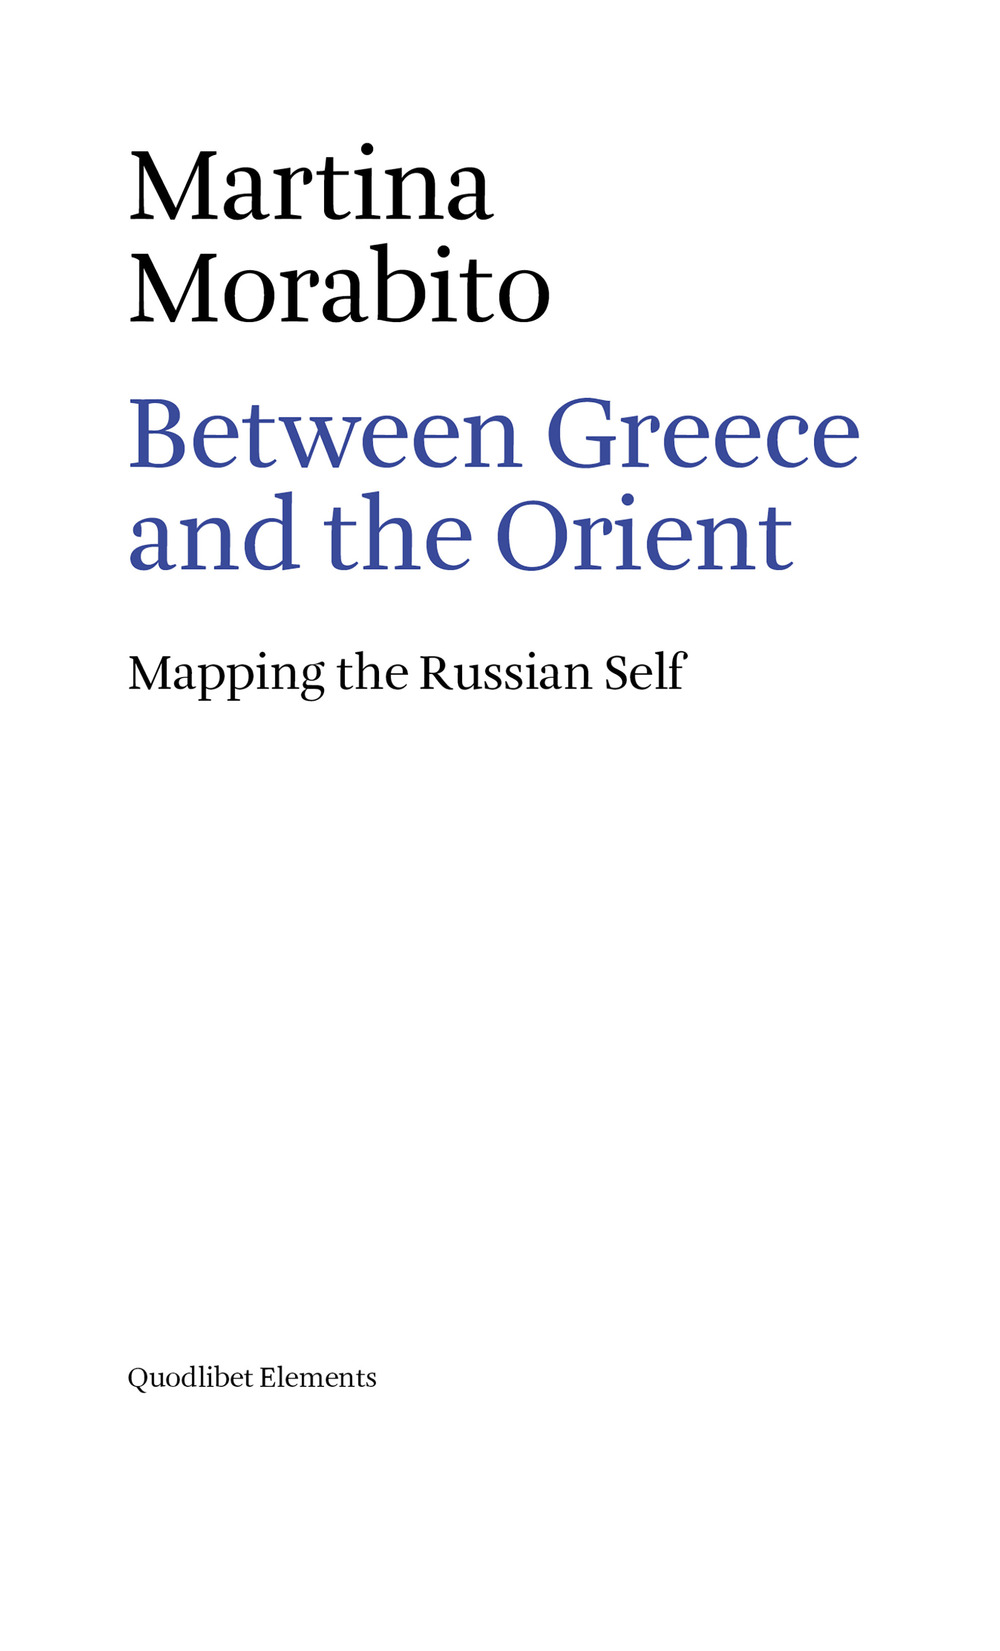 BETWEEN GREECE AND THE ORIENT. MAPPING THE RUSSIAN SELF - MARTINA DORABITO - 9788822908155